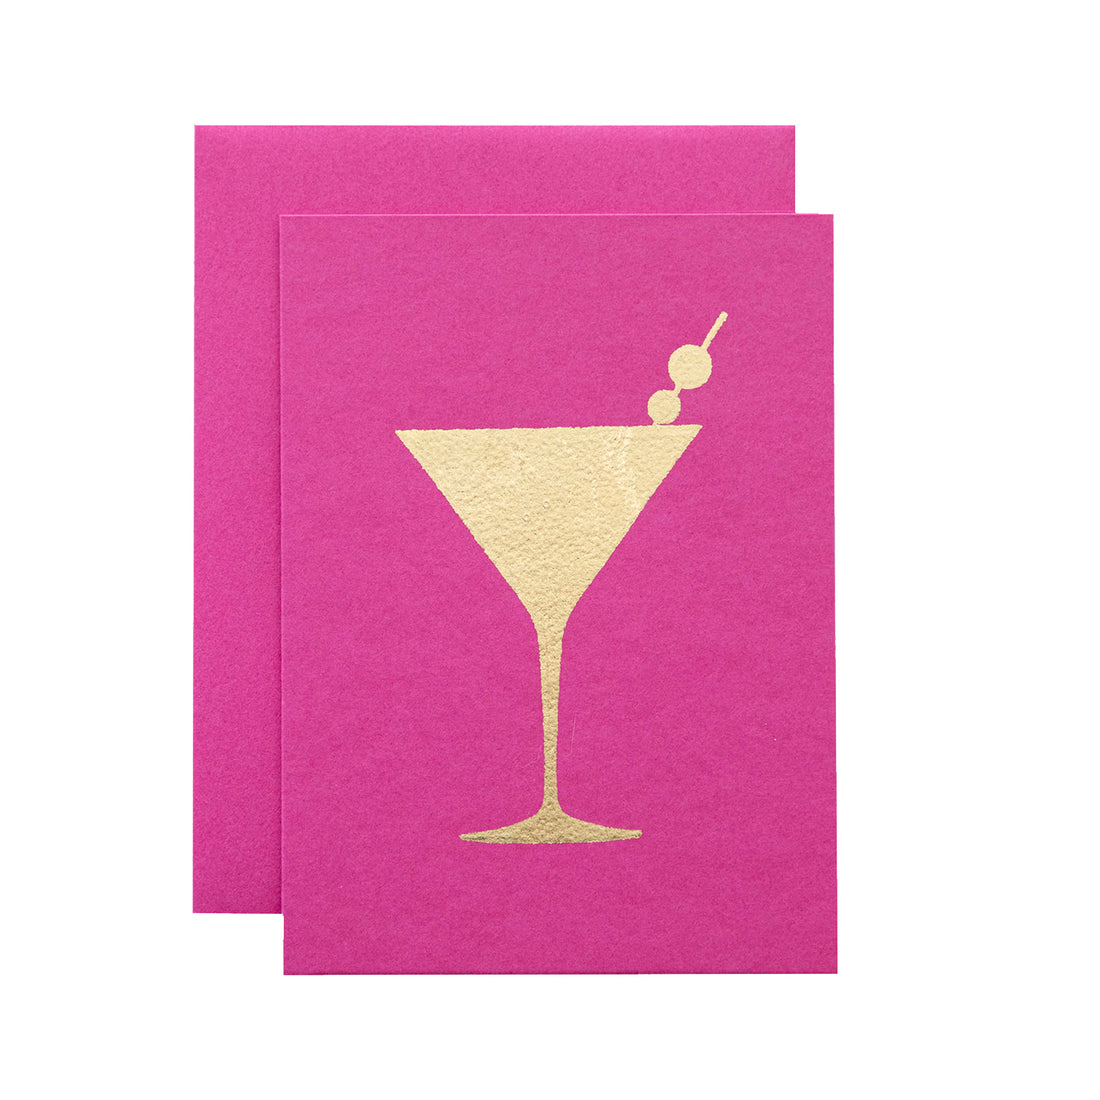 A pink card featuring the silhouette of a martini glass with an olive garnish in solid gold leaf.